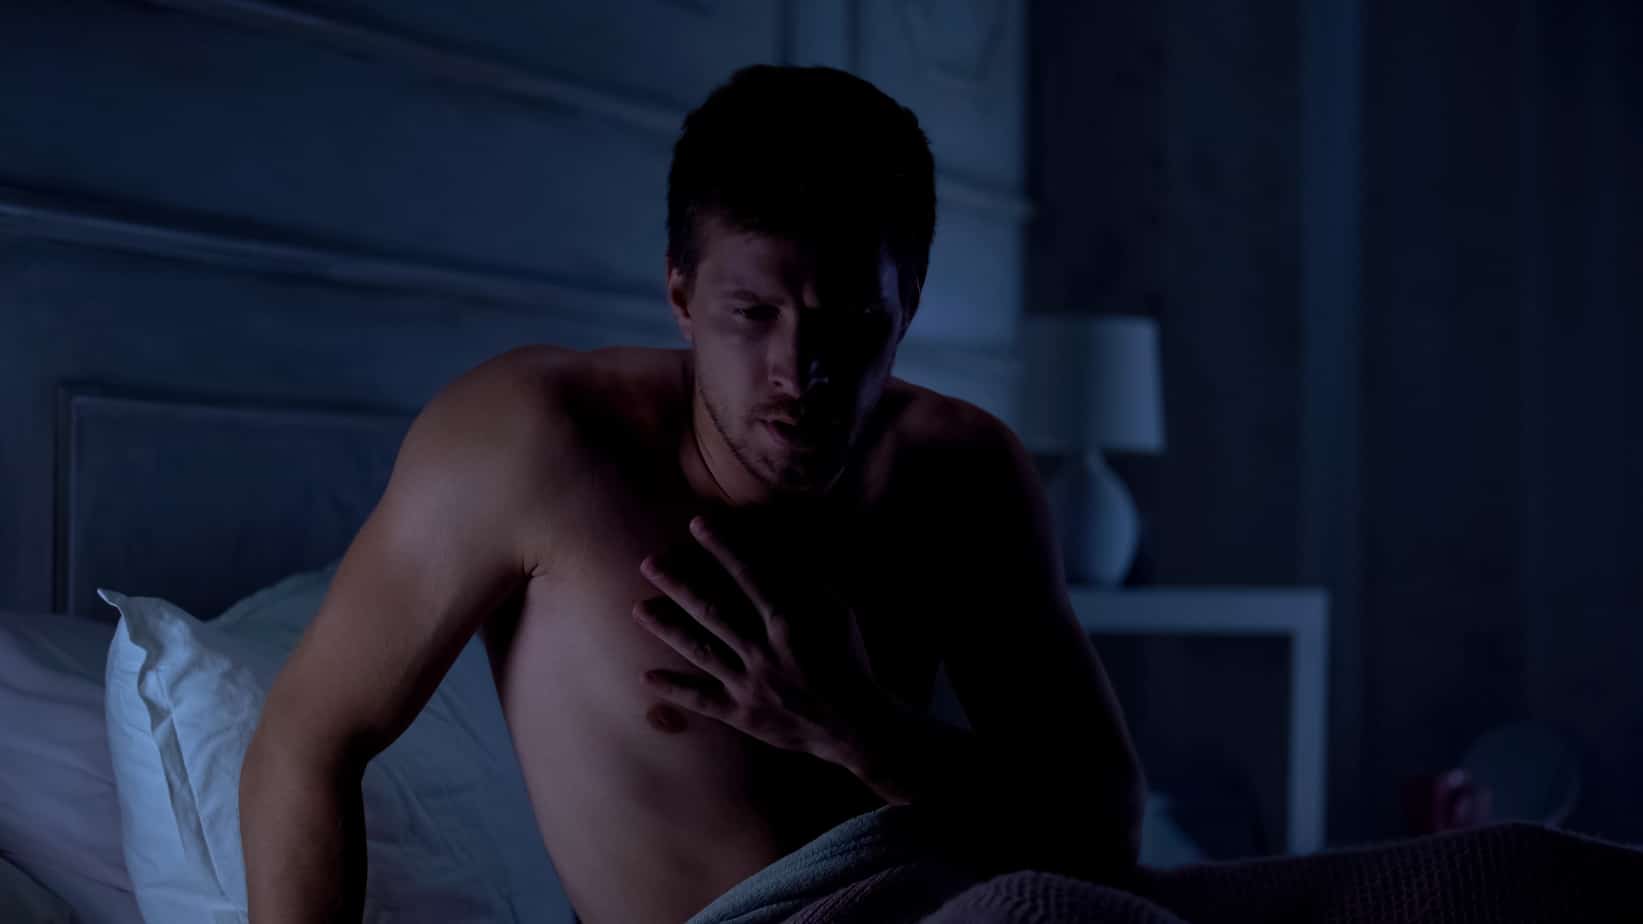 A shirtless man sitting on a bed in the dark